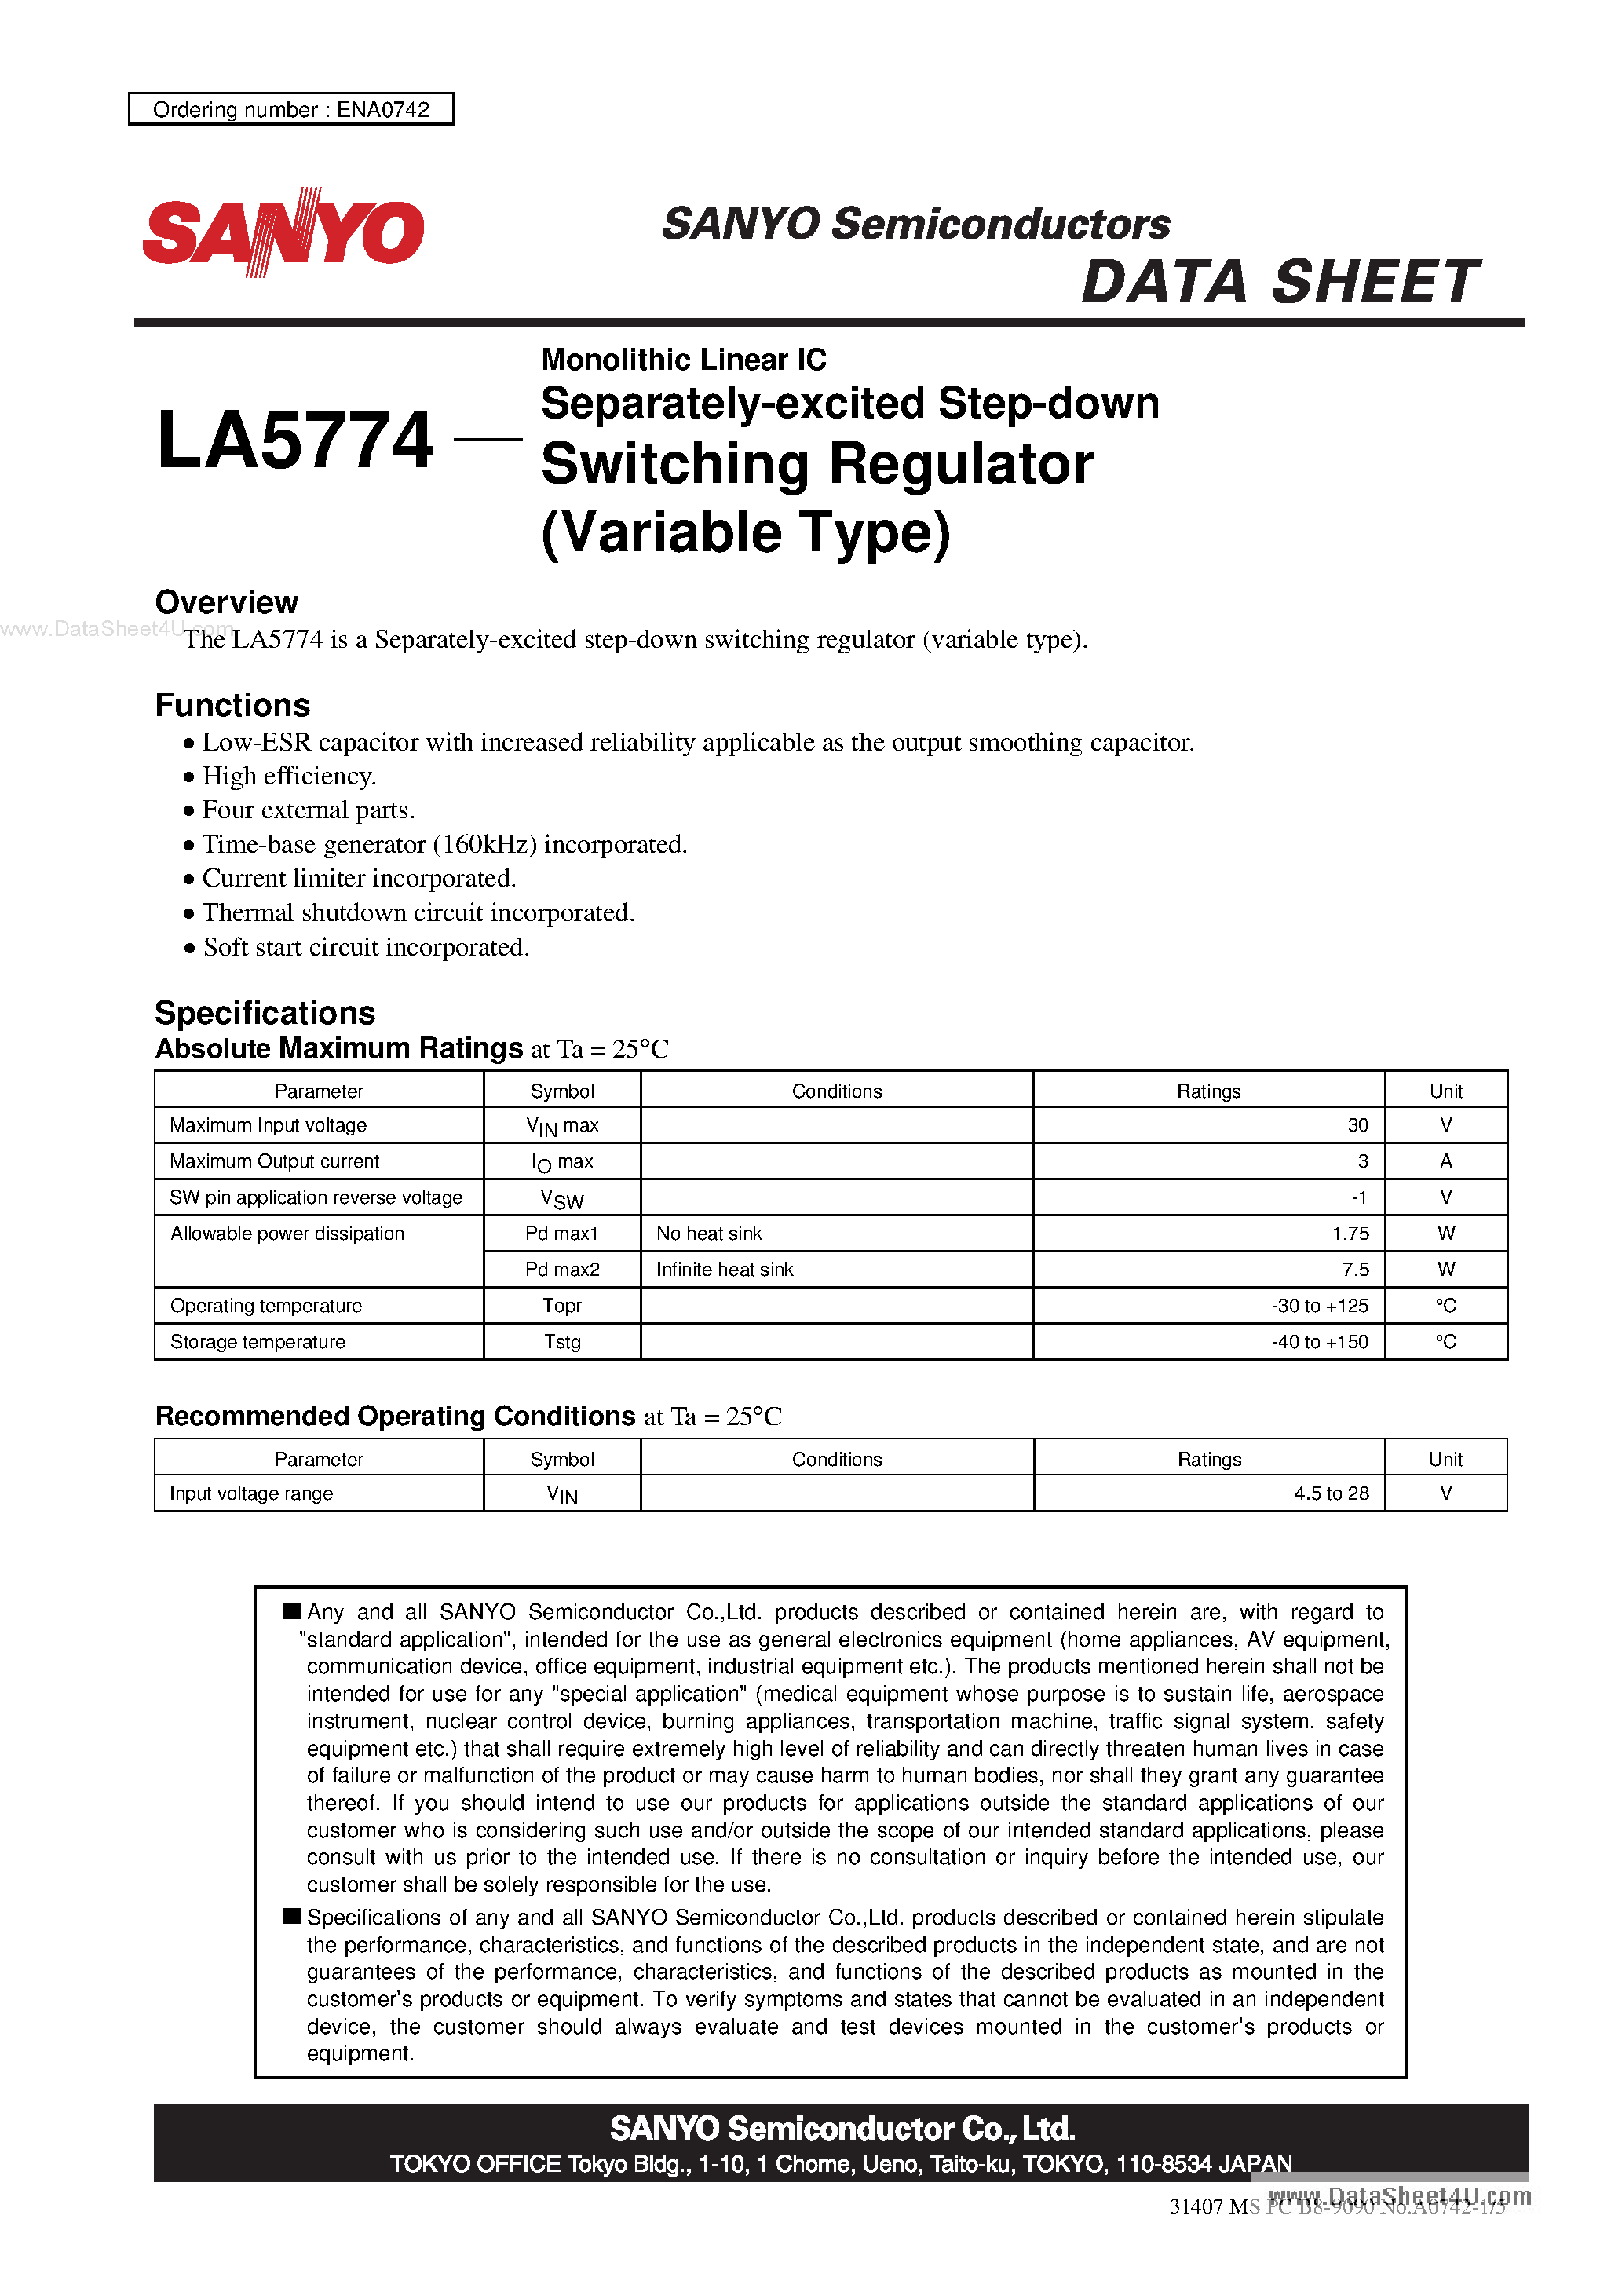 Даташит LA5774-Monolithic Linear IC Separately-Excited Step-Down Switching Regulator страница 1